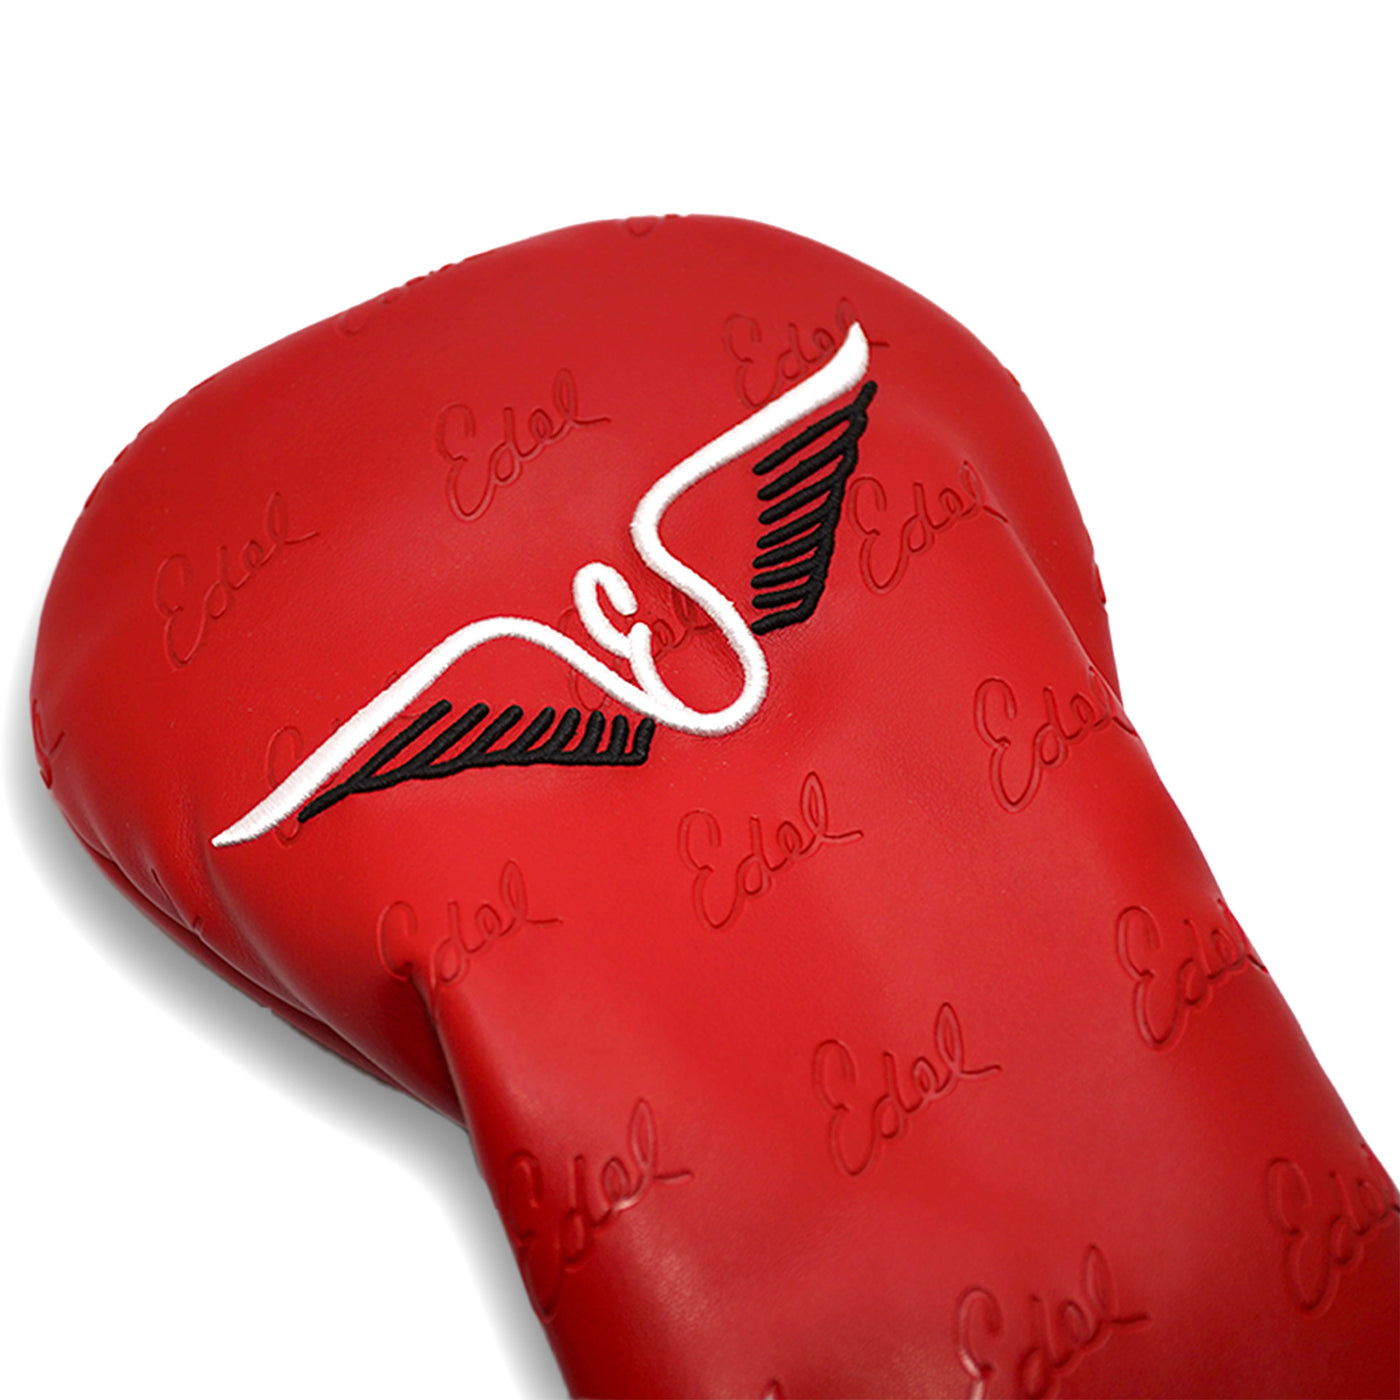 Edel Golf Driver Headcover Red Close-Up